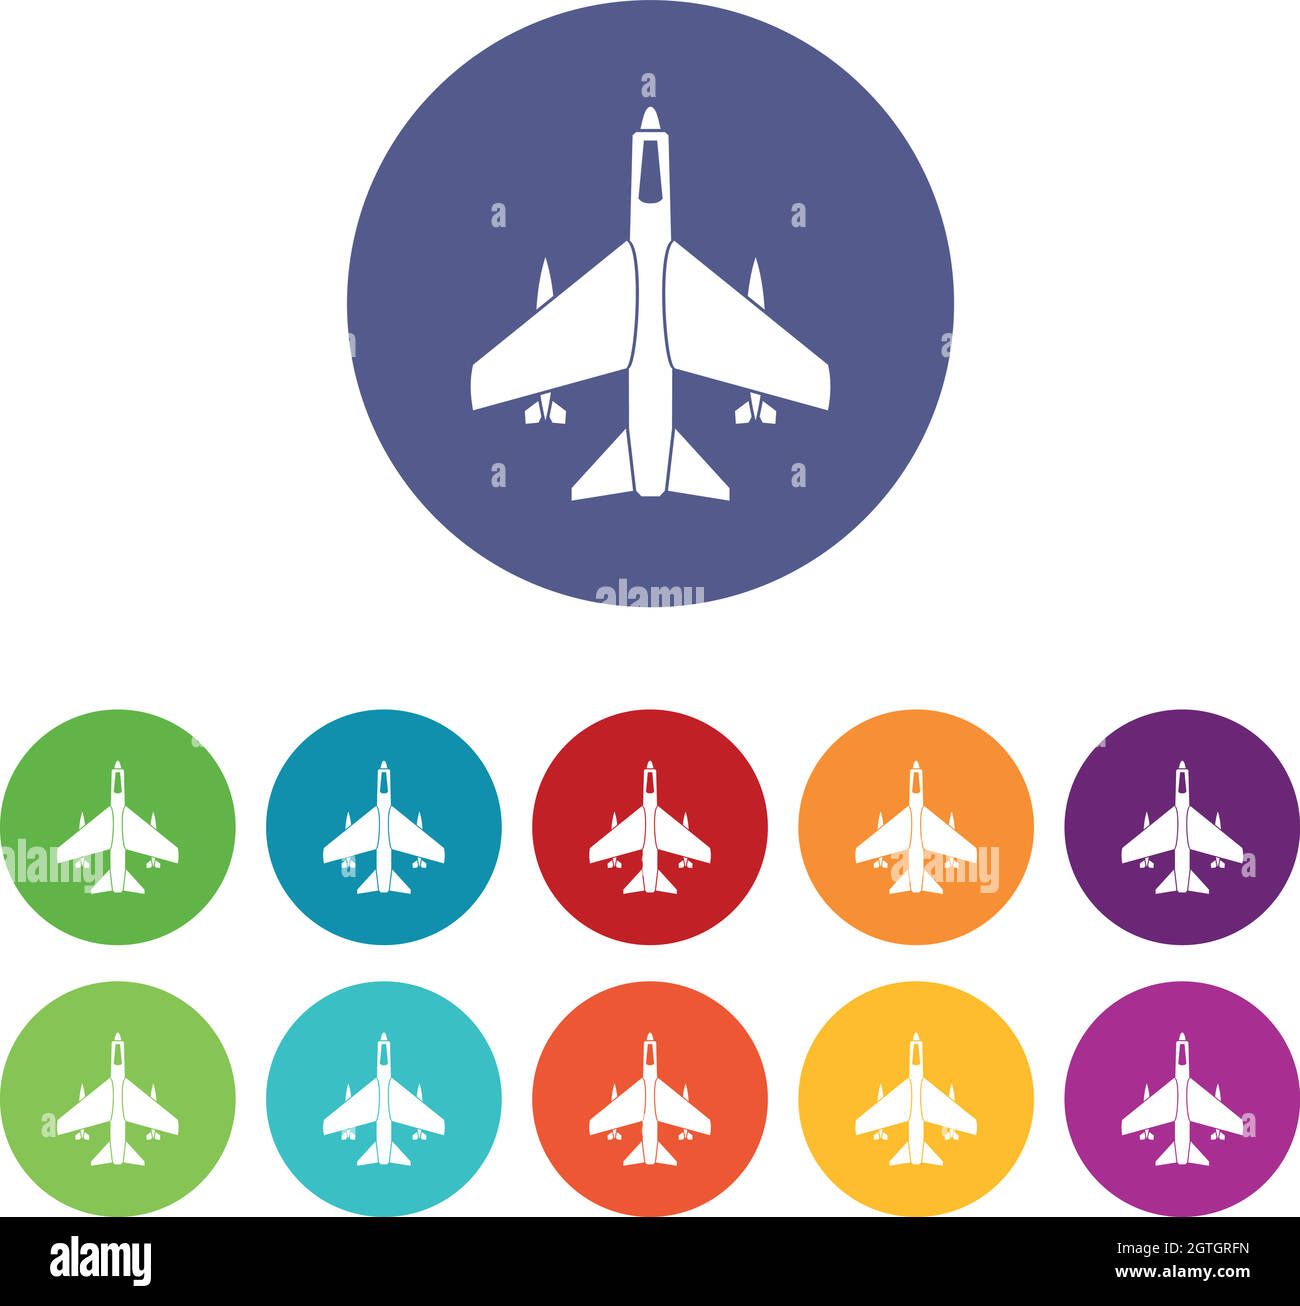 Armed fighter jet set icons Stock Vector